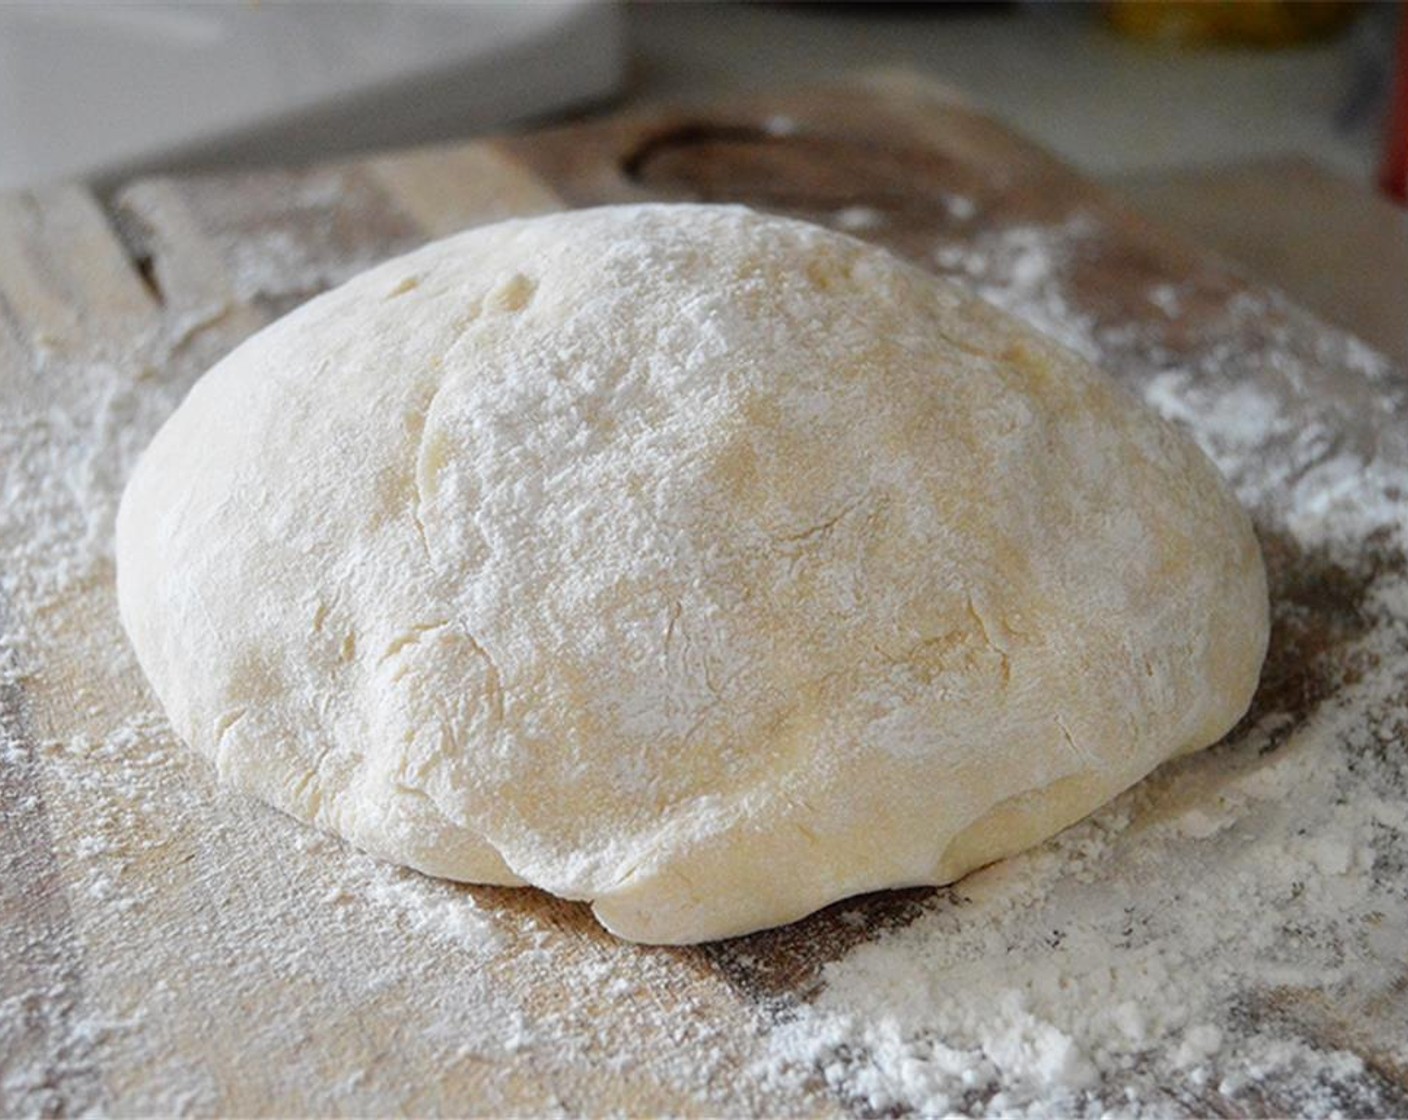 step 4 Turn dough out onto floured surface. Knead for 3-4 minutes or until dough is smooth and elastic.